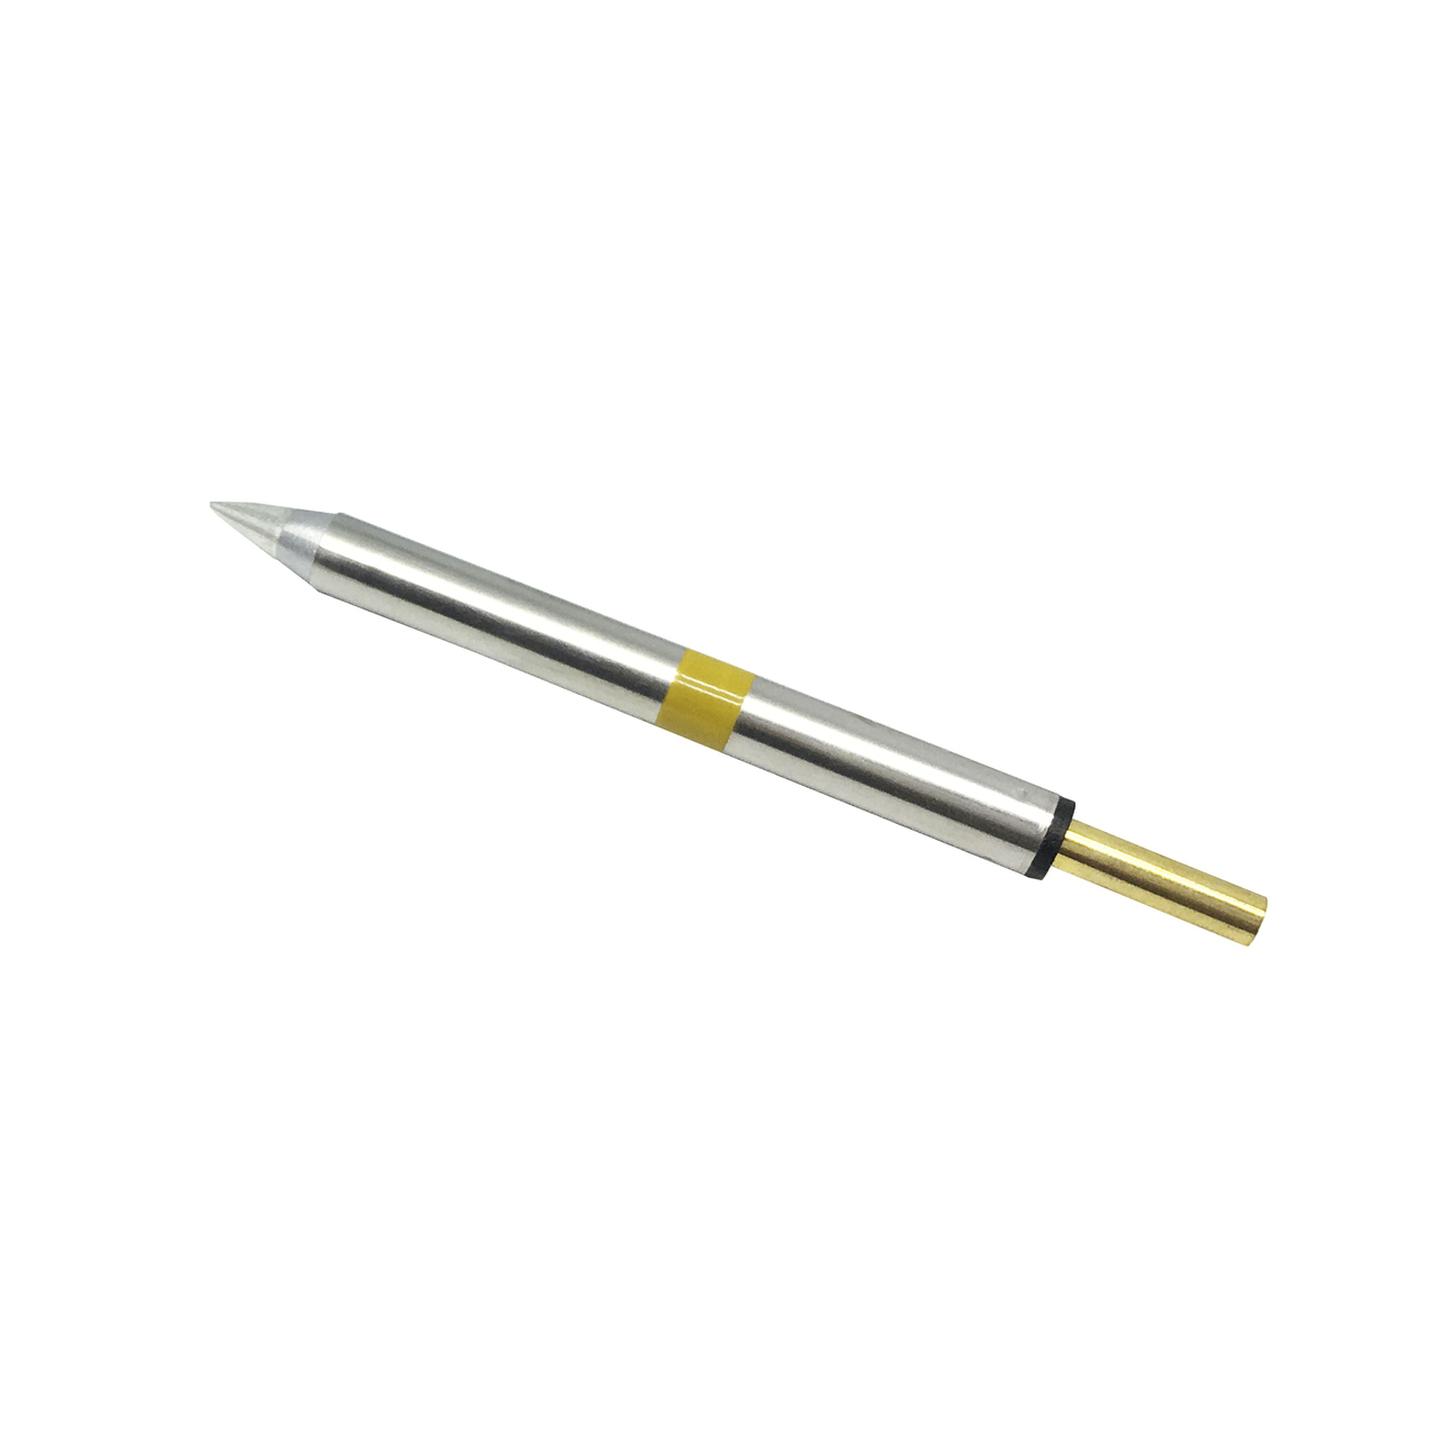 Spare Tip for TS1584 1.5mm Chisel